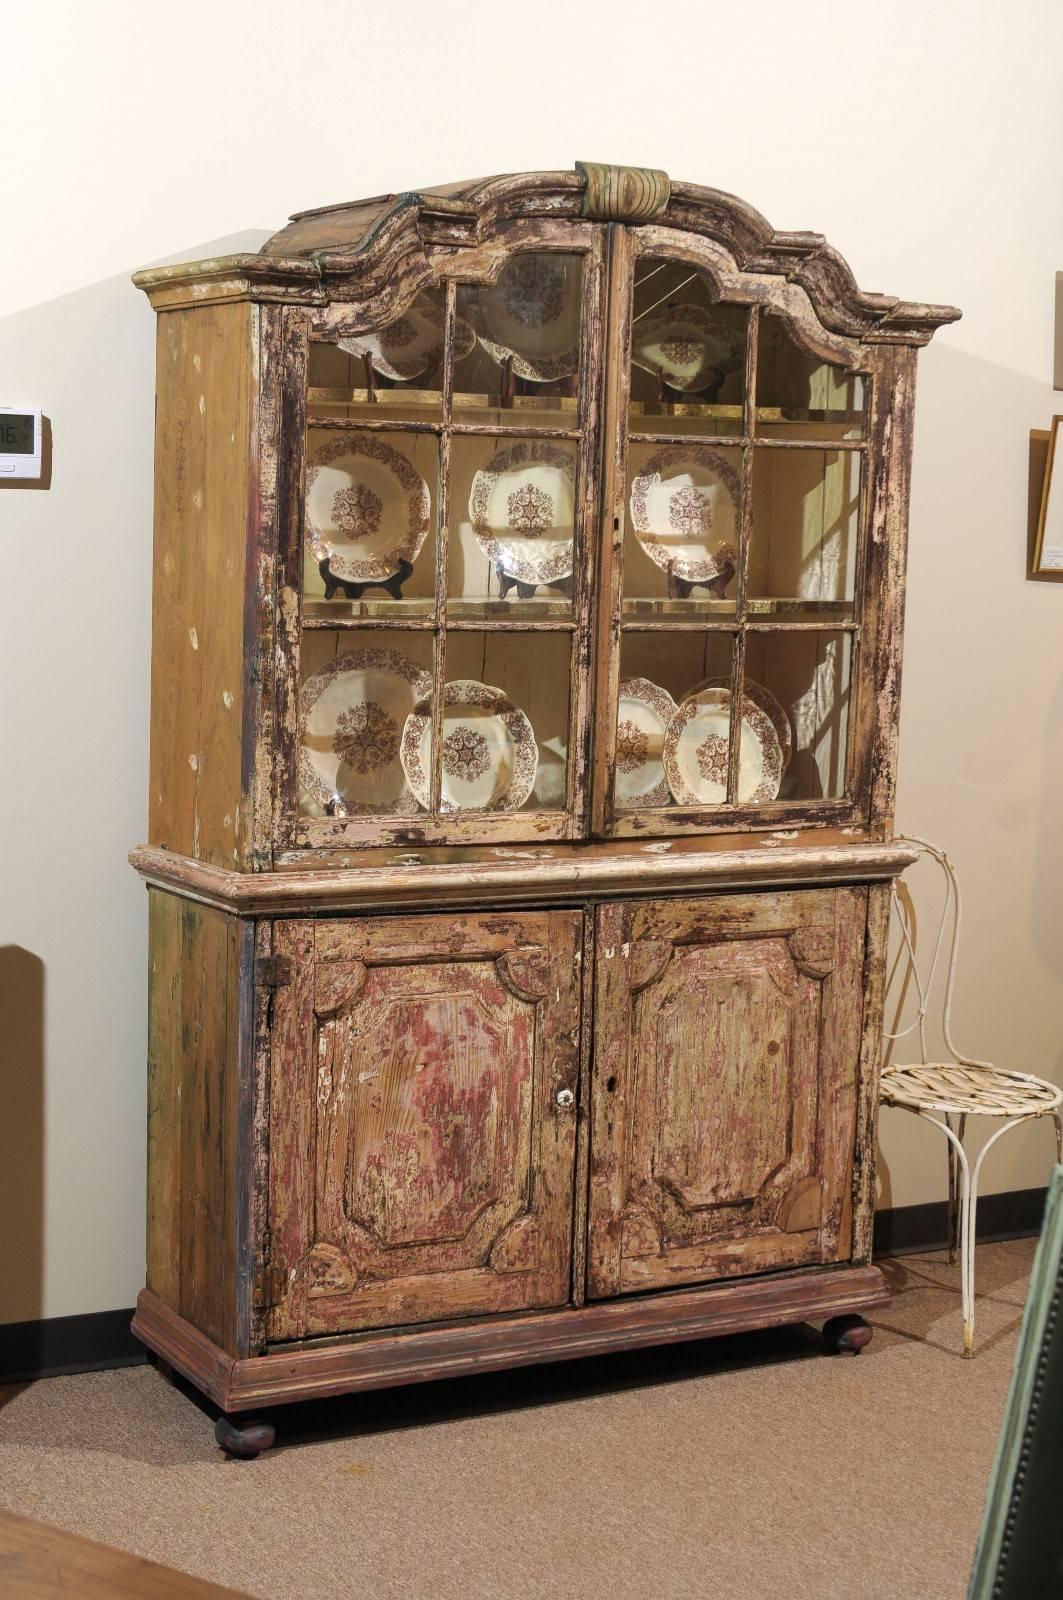  18th Century Dutch Buffet Deux Corps in a Brown/Red Distressed Finish, c.1780 For Sale 2